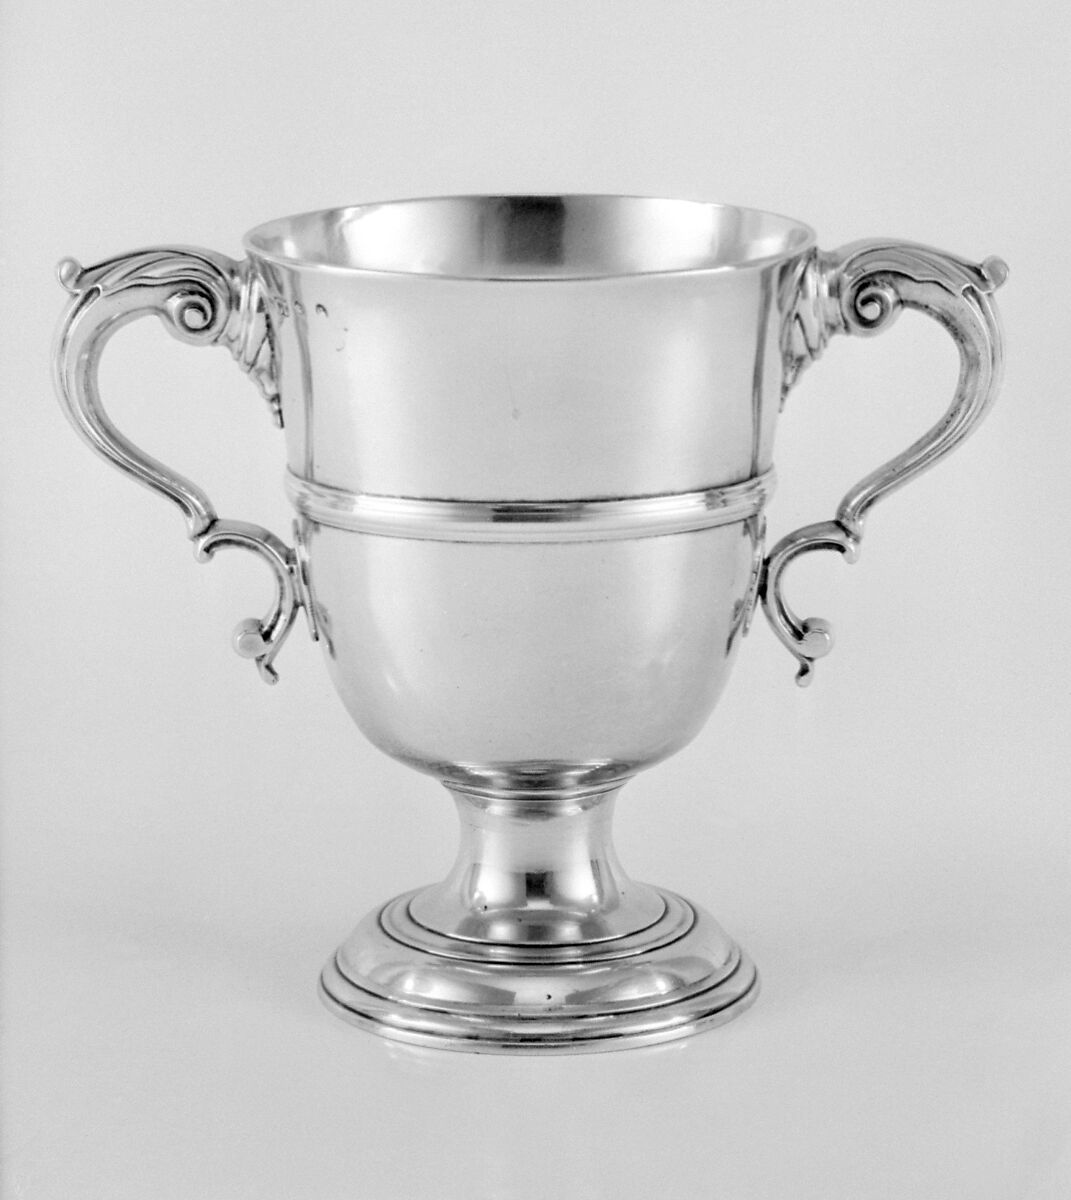 Two-handled standing cup, Charles Townsend (active 1770–85), Silver, Irish, Dublin 